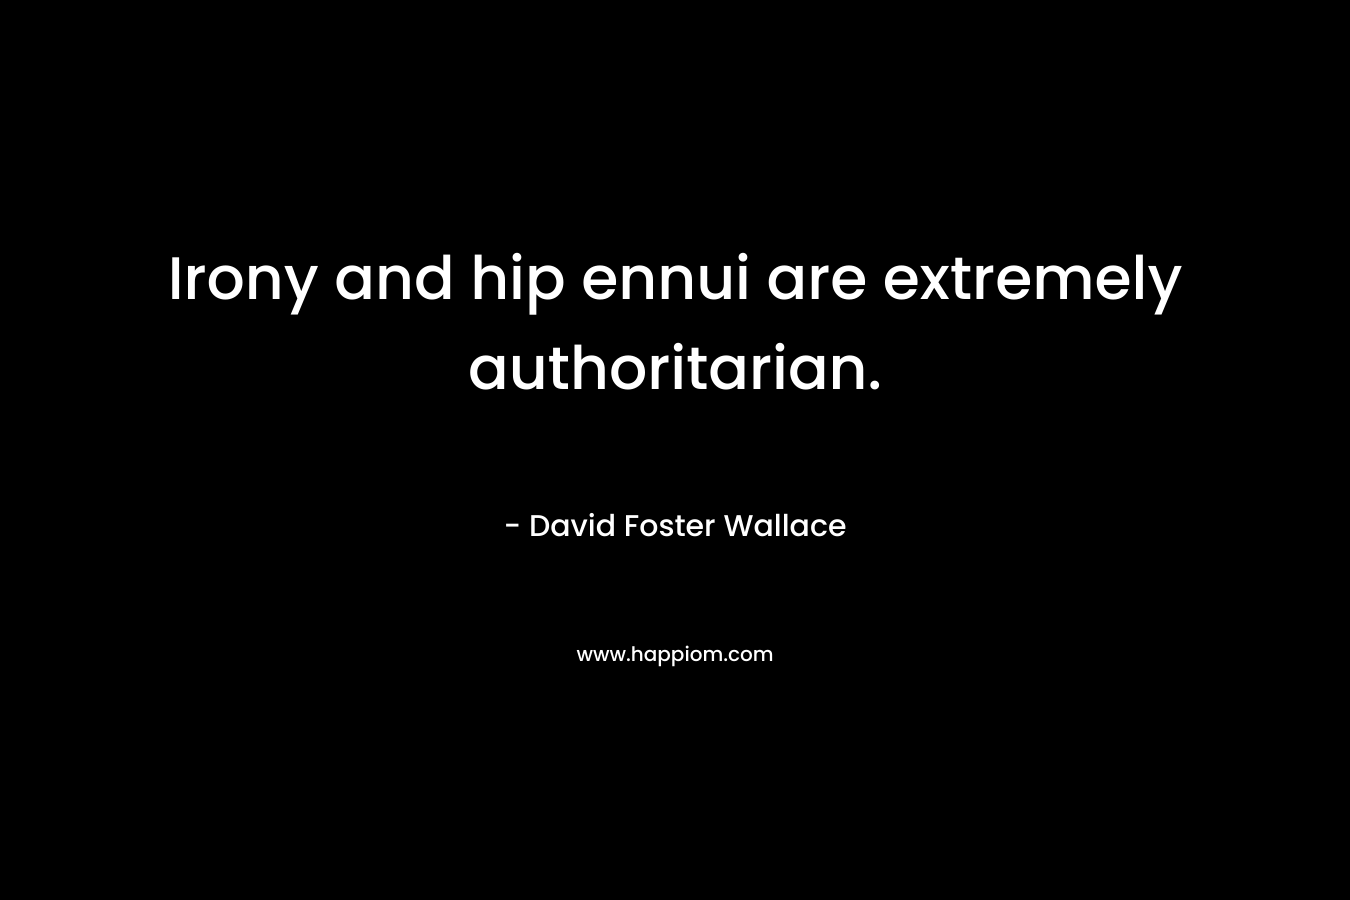 Irony and hip ennui are extremely authoritarian.